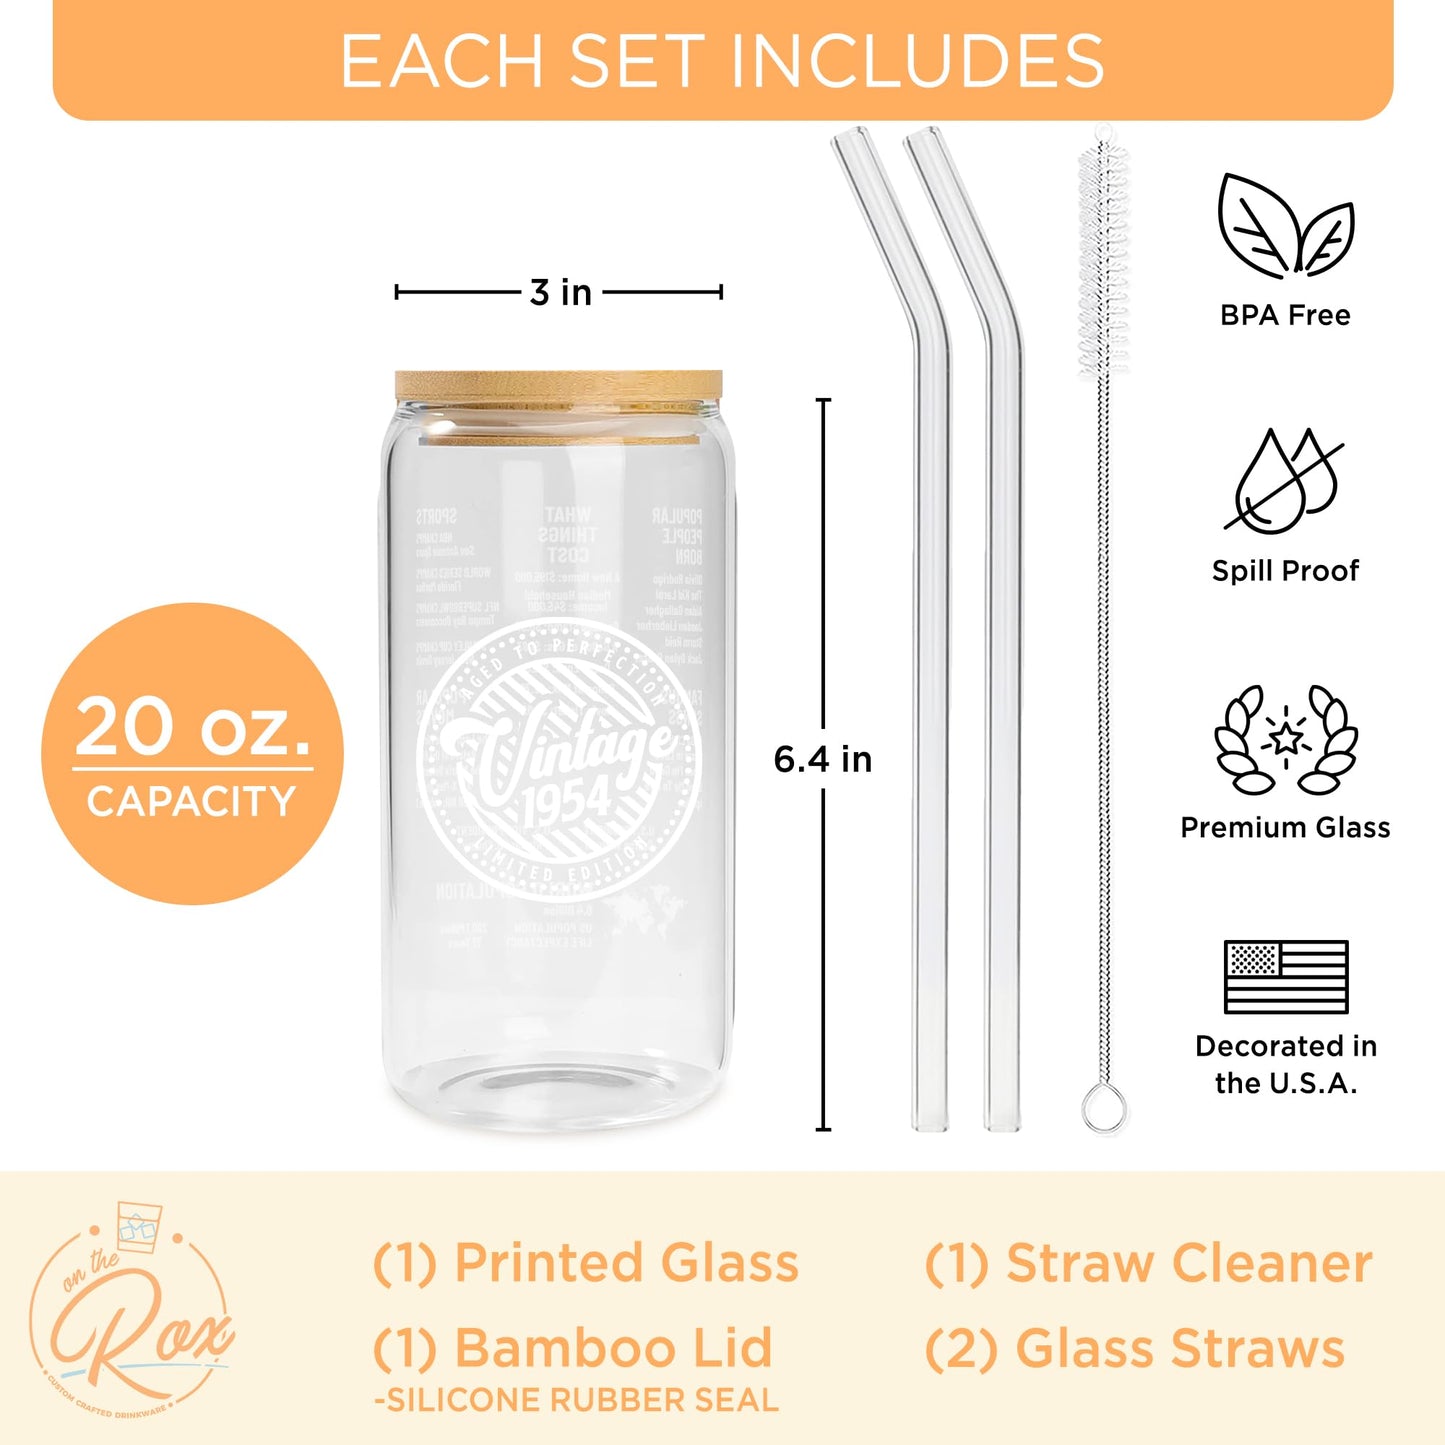 70th Birthday Gifts For Women - Vintage 1954 Soda Can Glass 20oz  w/ Bamboo Lid & Glass Straw Set